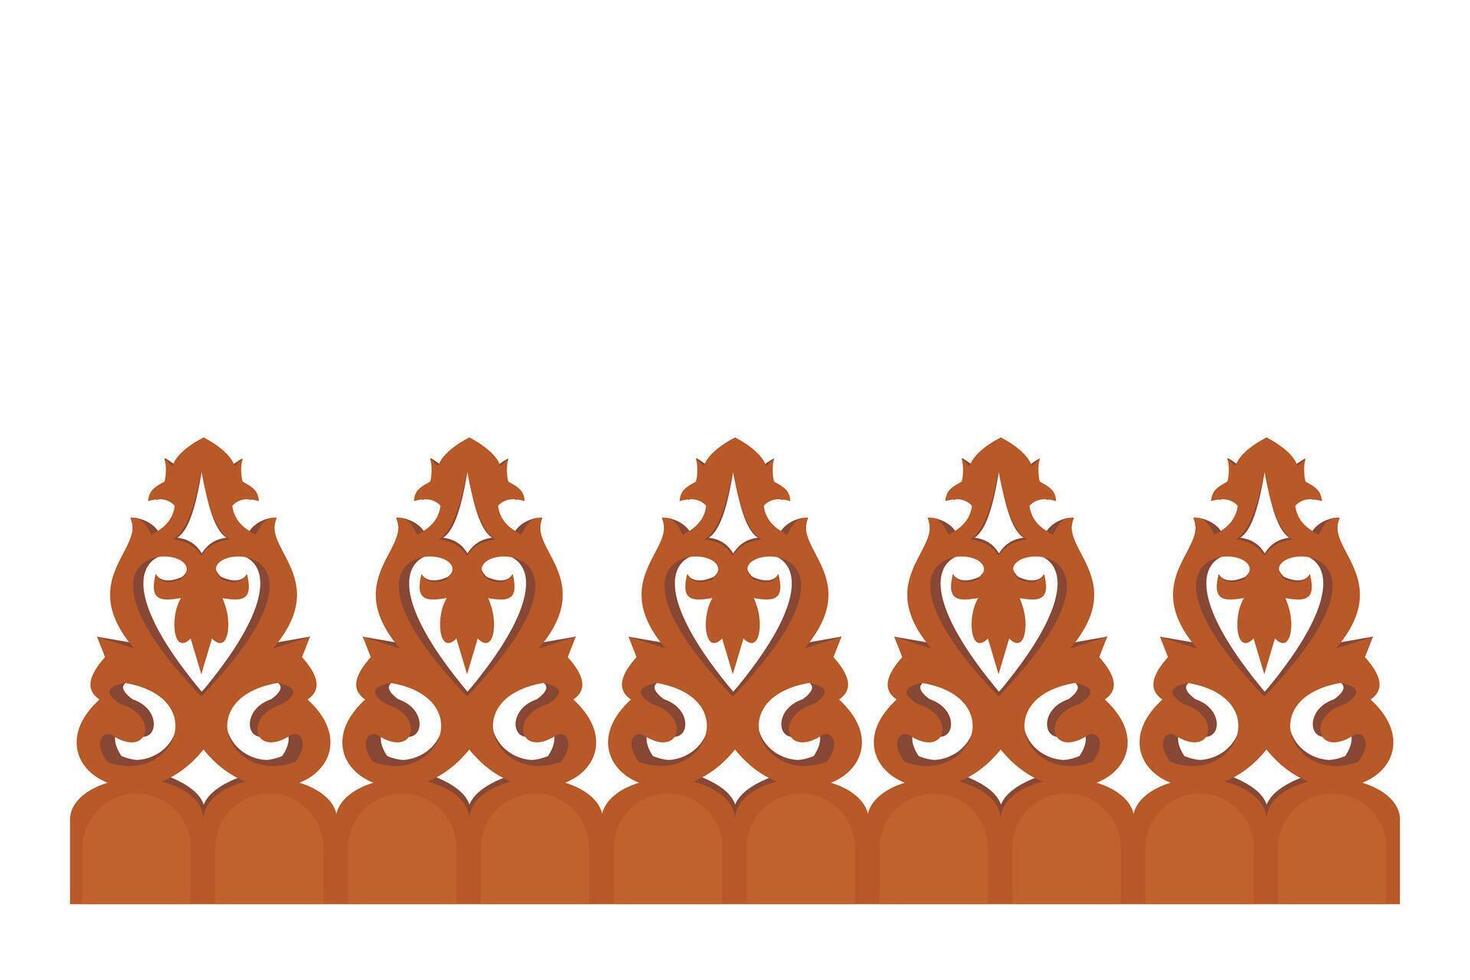 Ornament vector illustration, wood carving